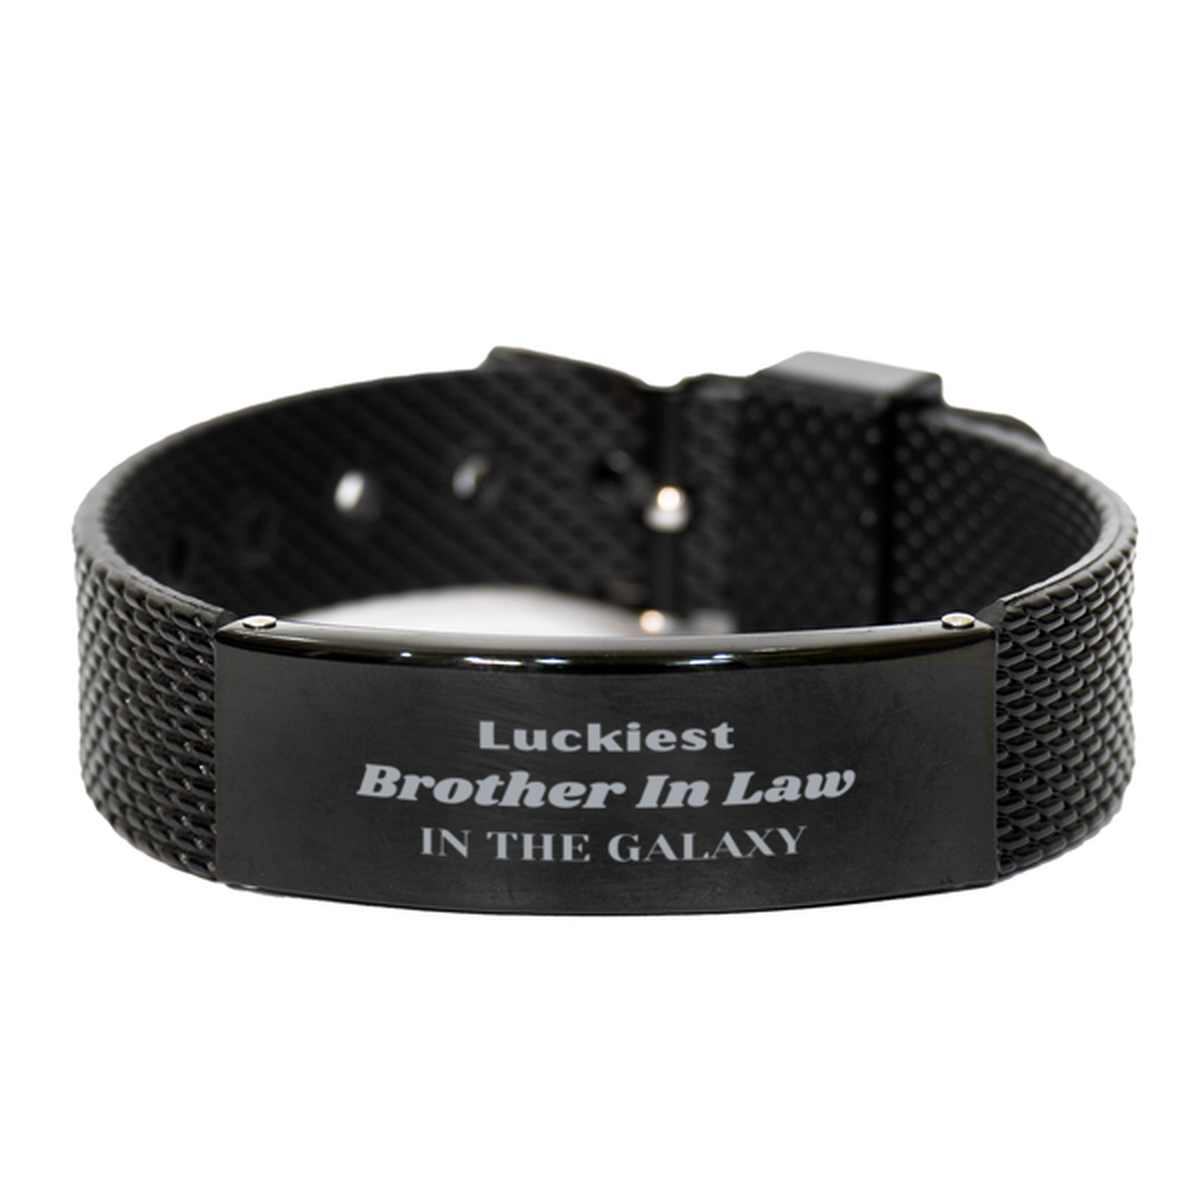 Luckiest Brother In Law in the Galaxy, To My Brother In Law Engraved Gifts, Christmas Brother In Law Black Shark Mesh Bracelet Gifts, X-mas Birthday Unique Gifts For Brother In Law Men Women